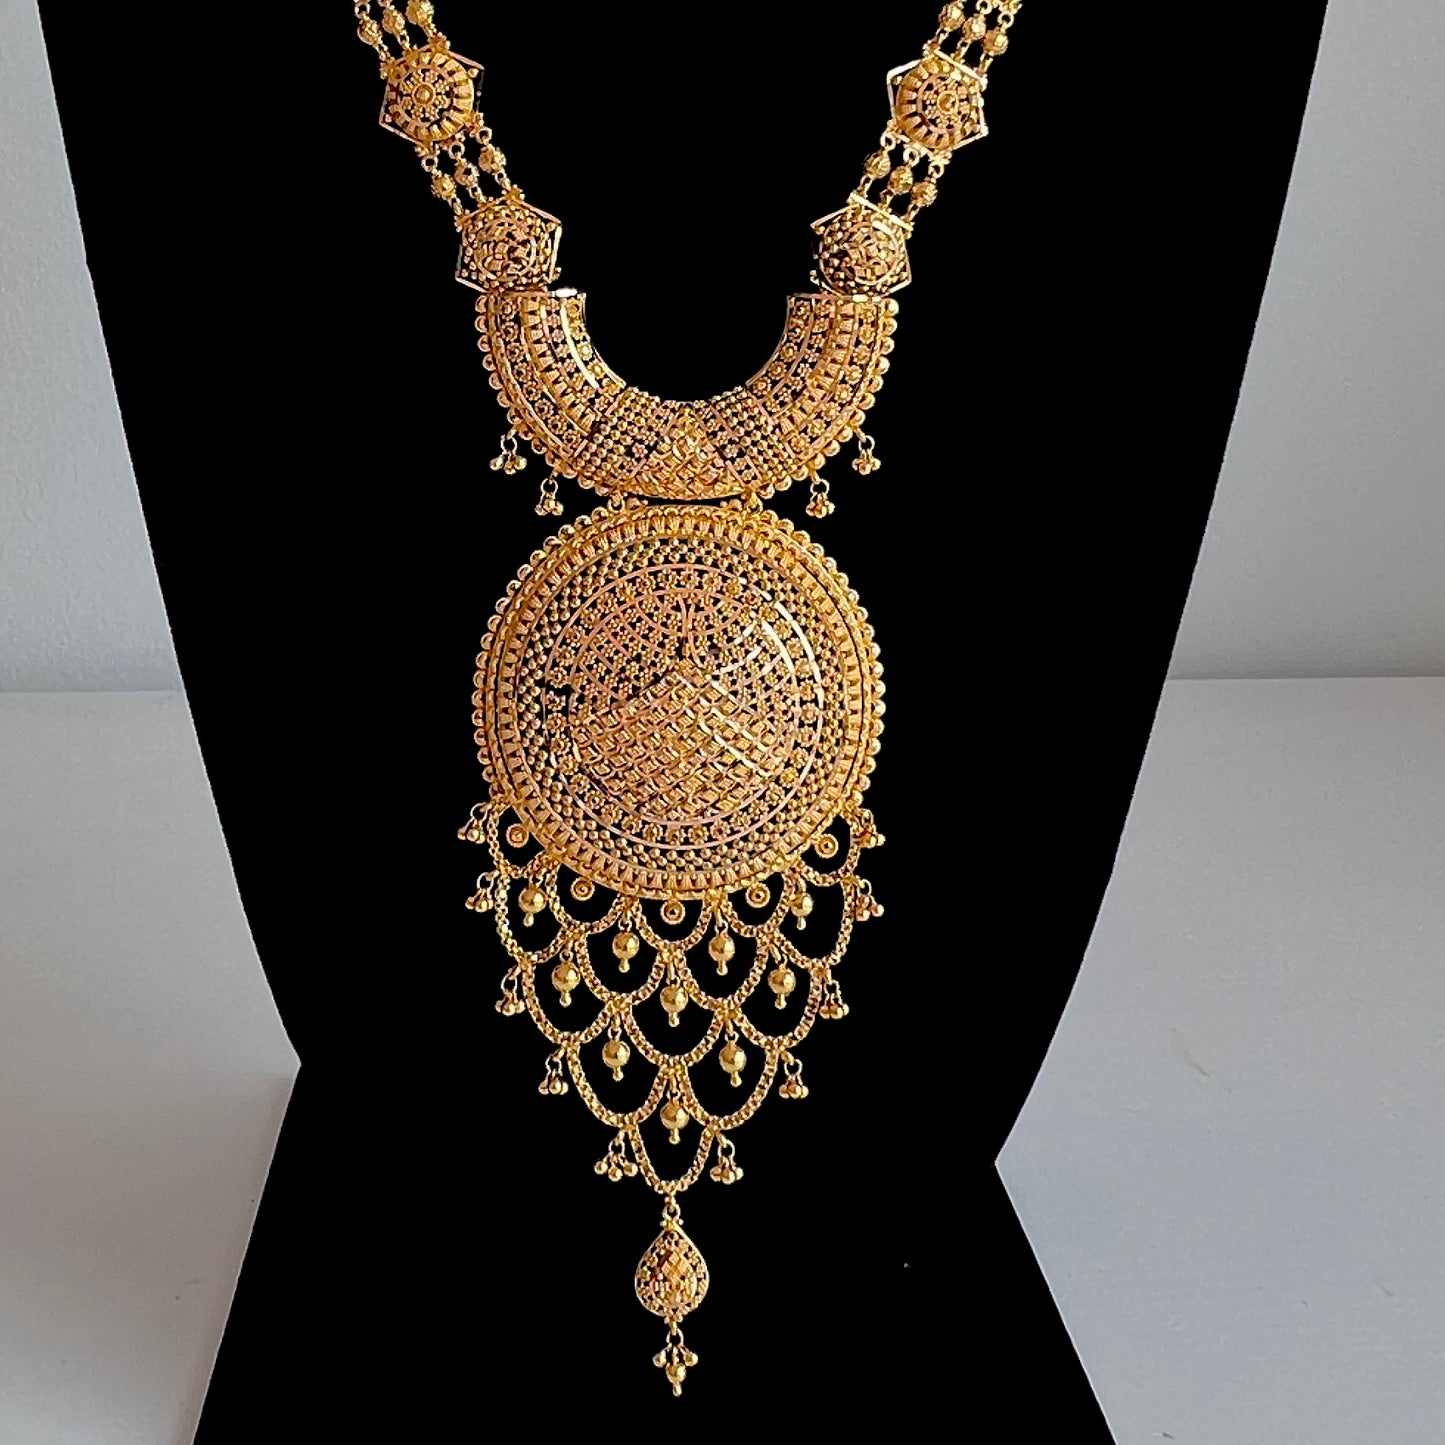 Luxurious Bridal Necklace Set with Thick Circular Center Piece and Fine Earrings